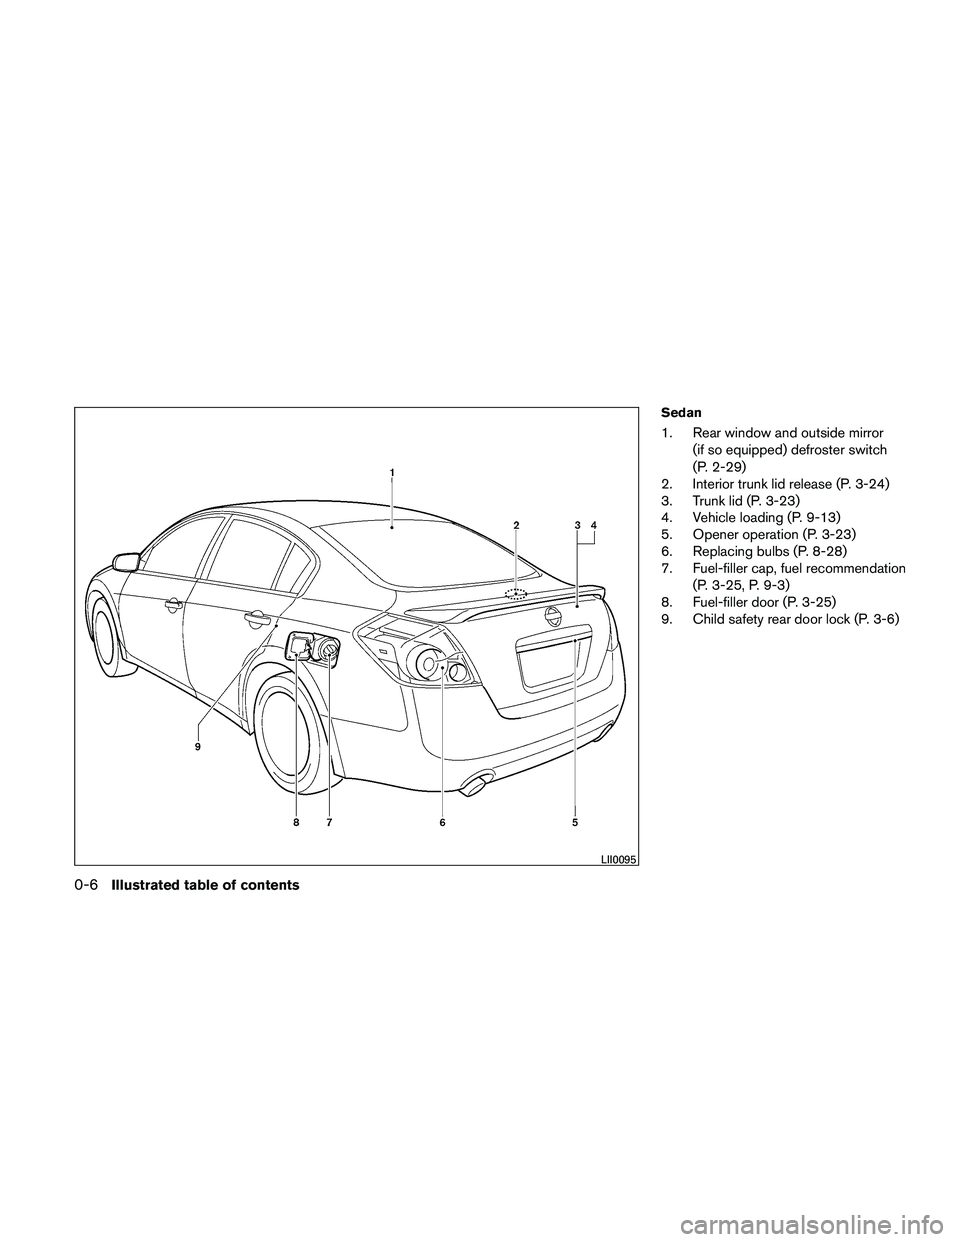 NISSAN ALTIMA 2011  Owners Manual Sedan
1. Rear window and outside mirror(if so equipped) defroster switch
(P. 2-29)
2. Interior trunk lid release (P. 3-24)
3. Trunk lid (P. 3-23)
4. Vehicle loading (P. 9-13)
5. Opener operation (P. 3